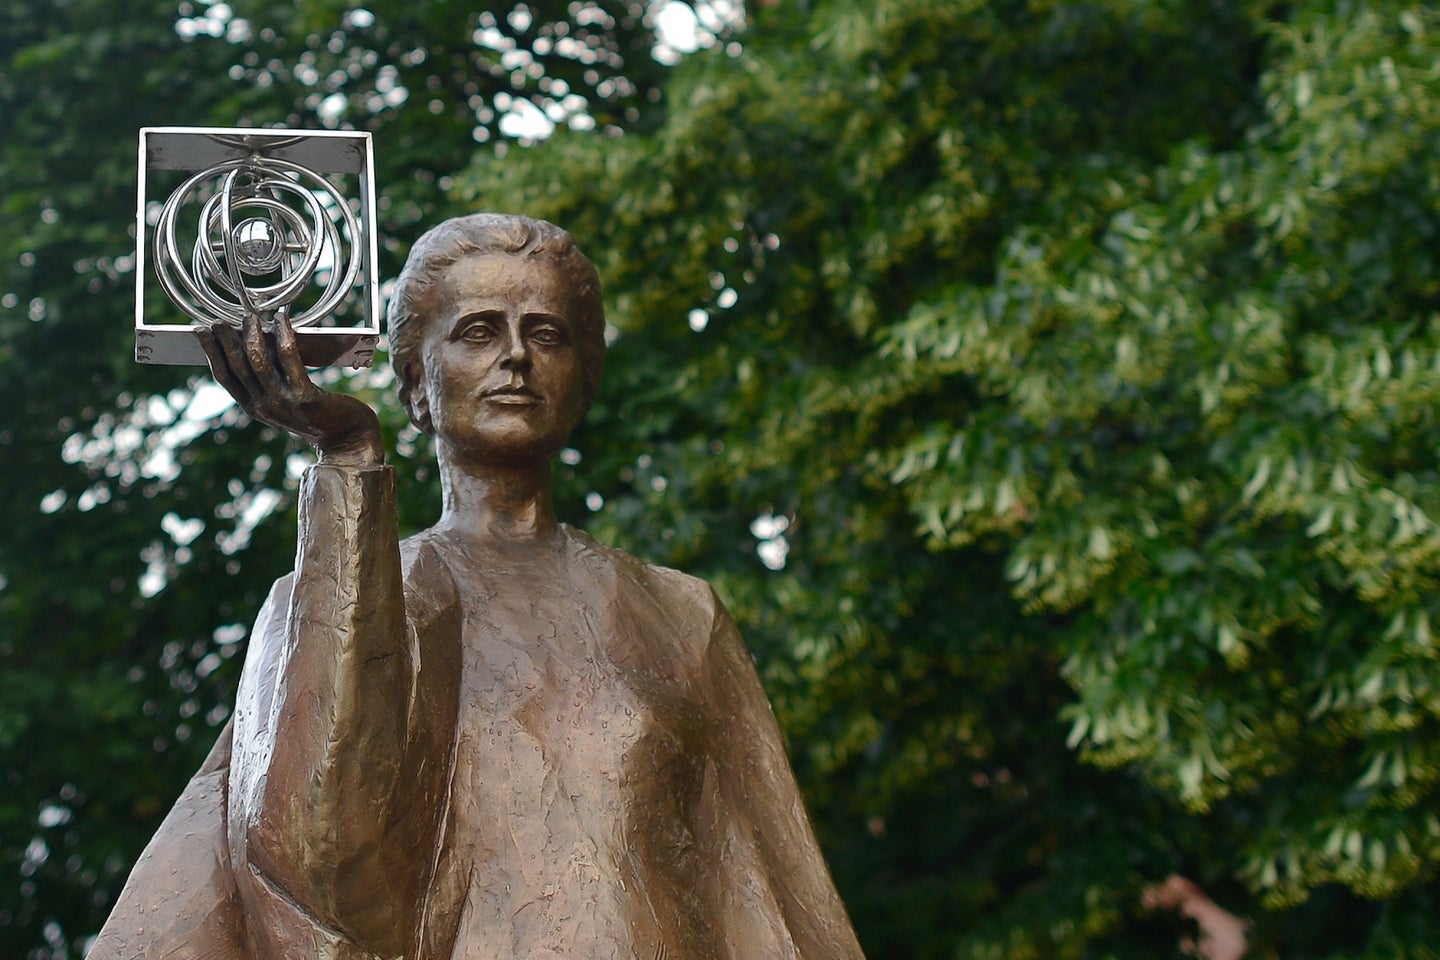 A bronze statue of chemist Marie Curie holding a model of the atom